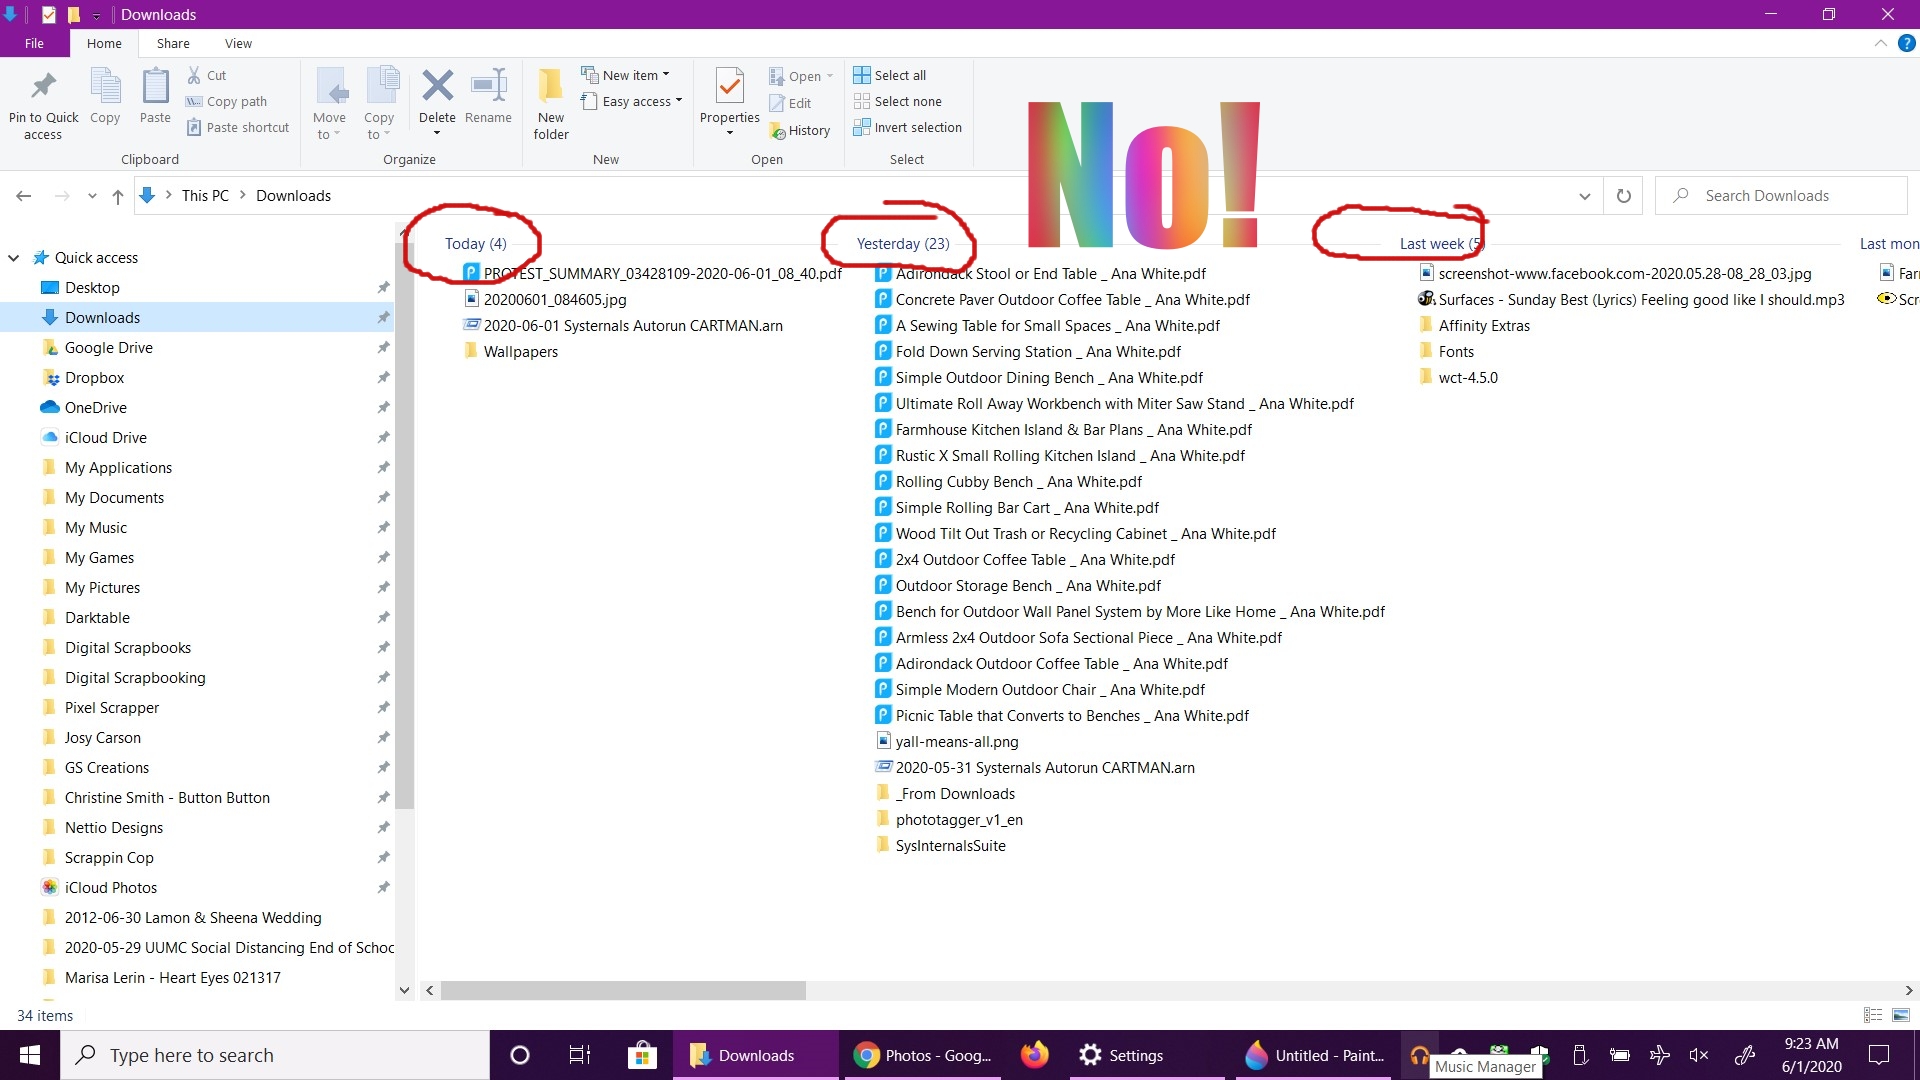 Windows 10 Build 1909 Update now shows date in List View b961c87e-9374-402c-b202-cd8af8f6d19b?upload=true.jpg